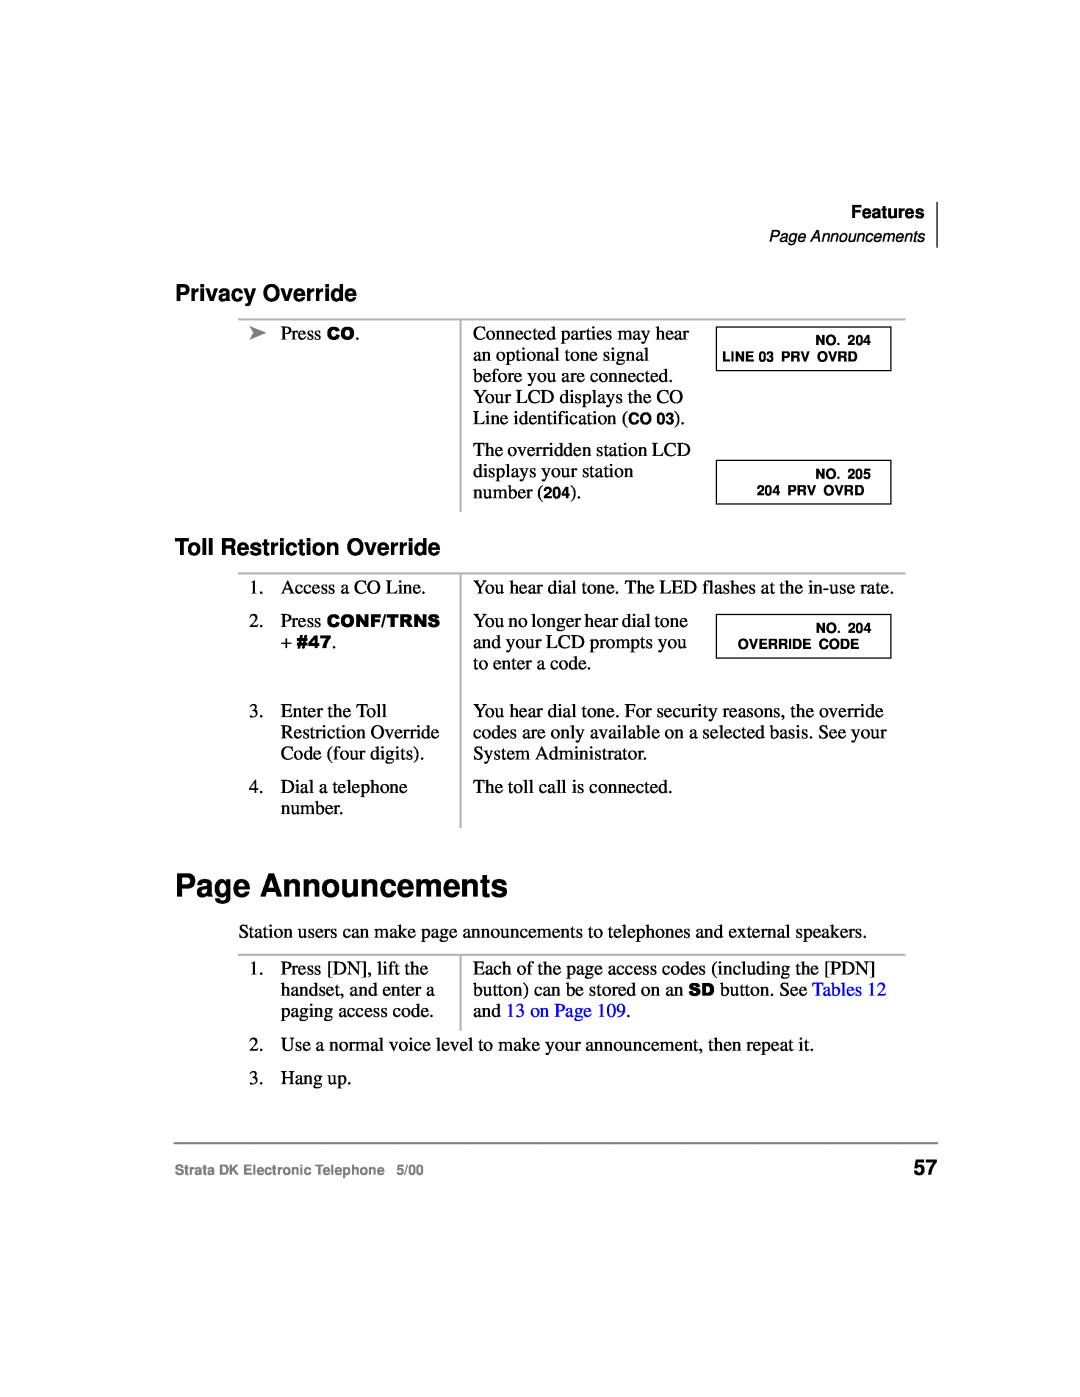 Toshiba Strata DK manual Page Announcements, Privacy Override, Toll Restriction Override 